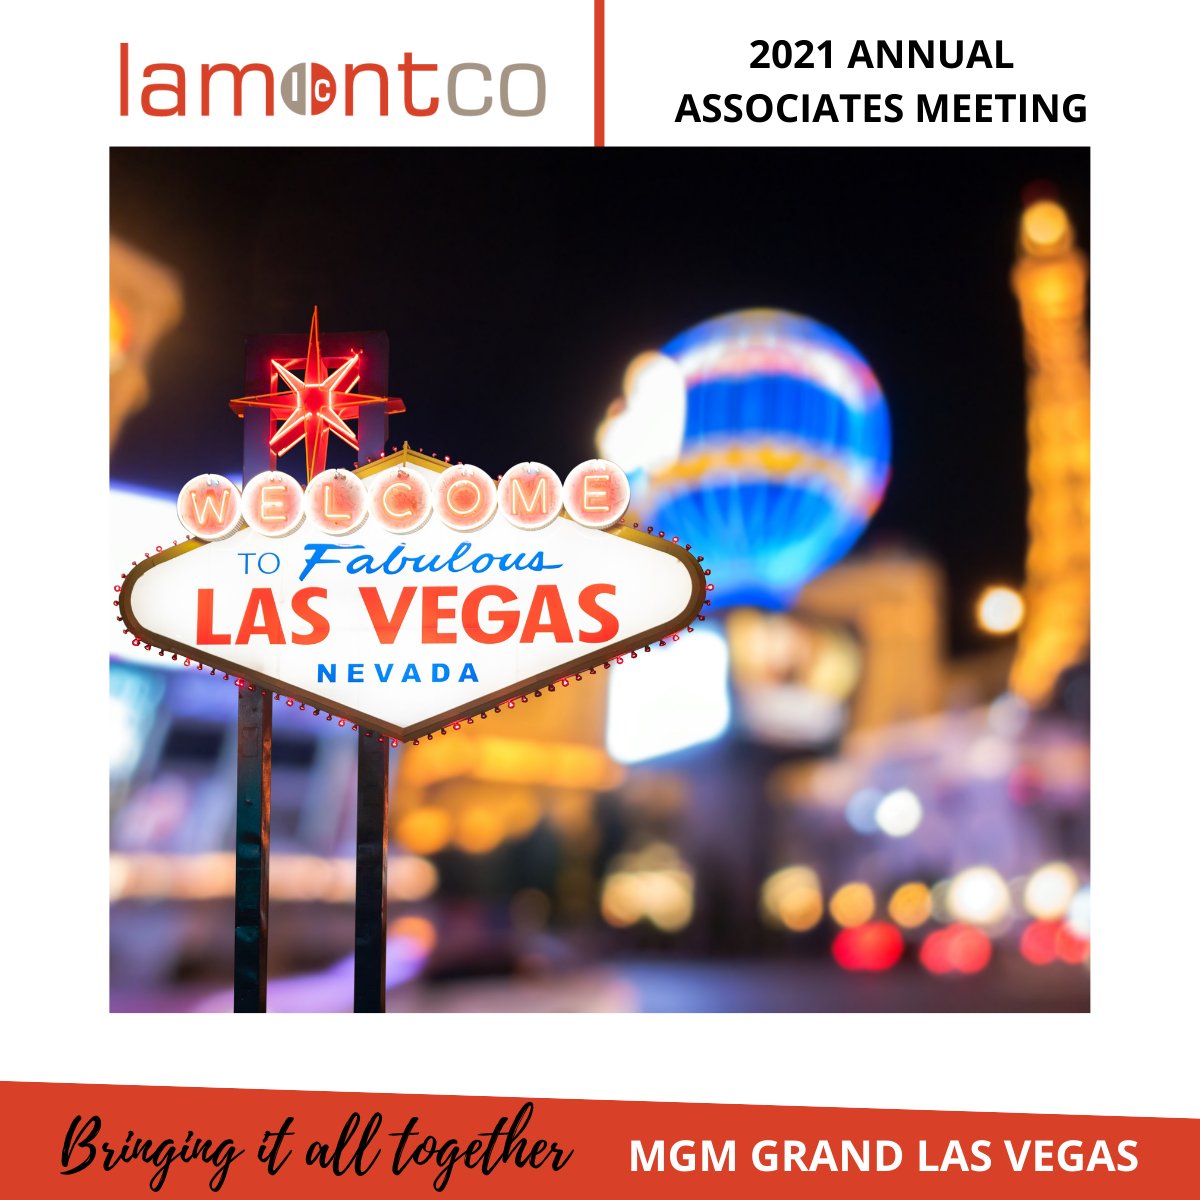 One week to go until the LamontCo Team meets face to face with Hotel, CVB and Hospitality Partners at the MGM Grand Hotel & Casino Las Vegas. 

If you are interested in attending, we have 3 spots available.

Viva Las Vegas!

#hospitalityindustry #hospitalitystrong  #mgmresorts